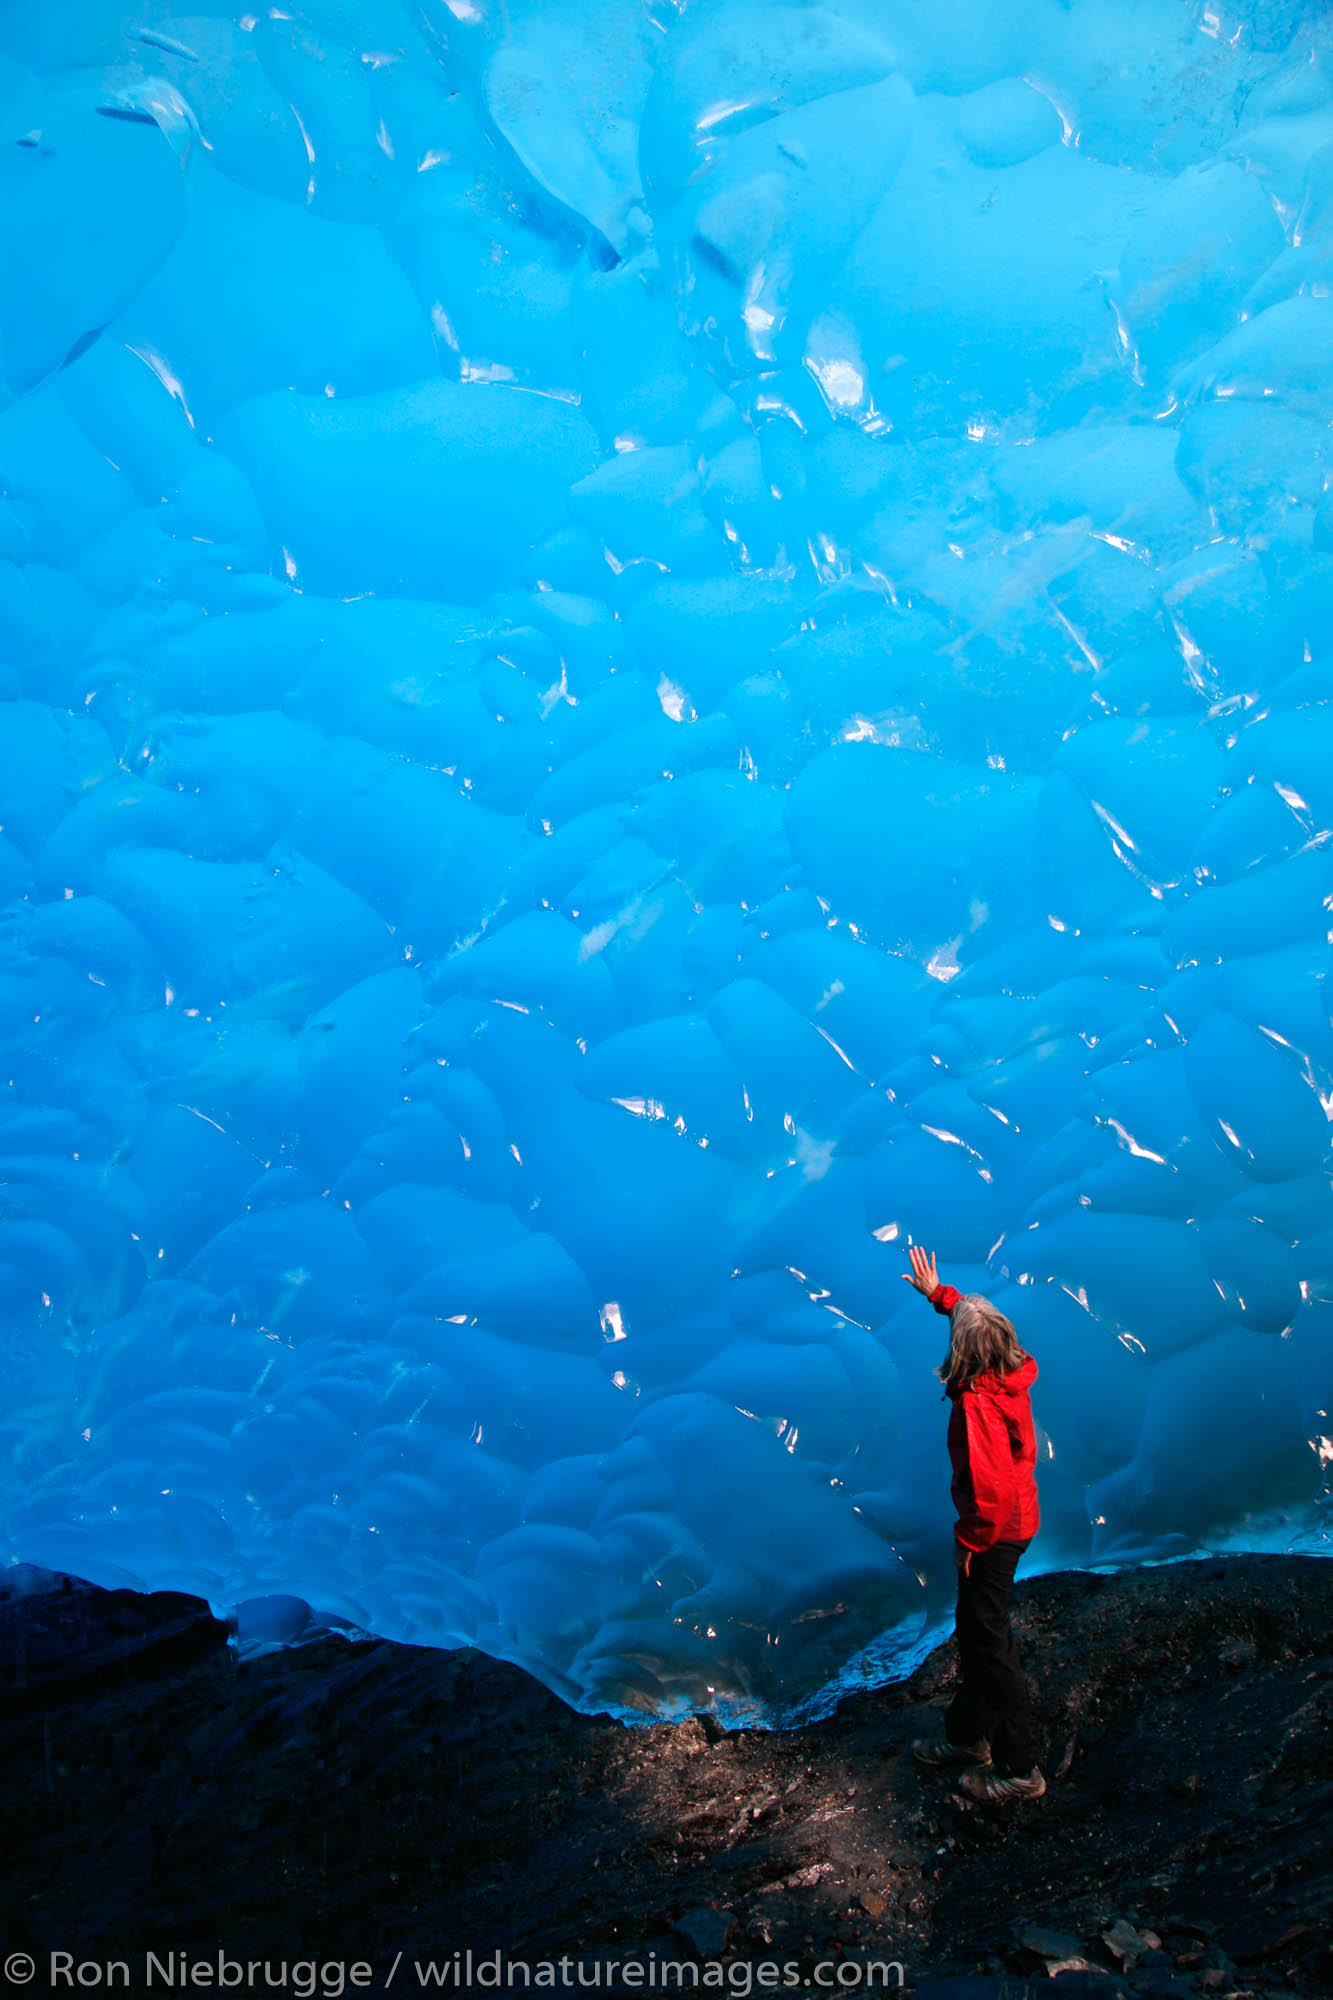 A hiker in an ice cave in Mendenhall Glacier, Juneau, Alaska.